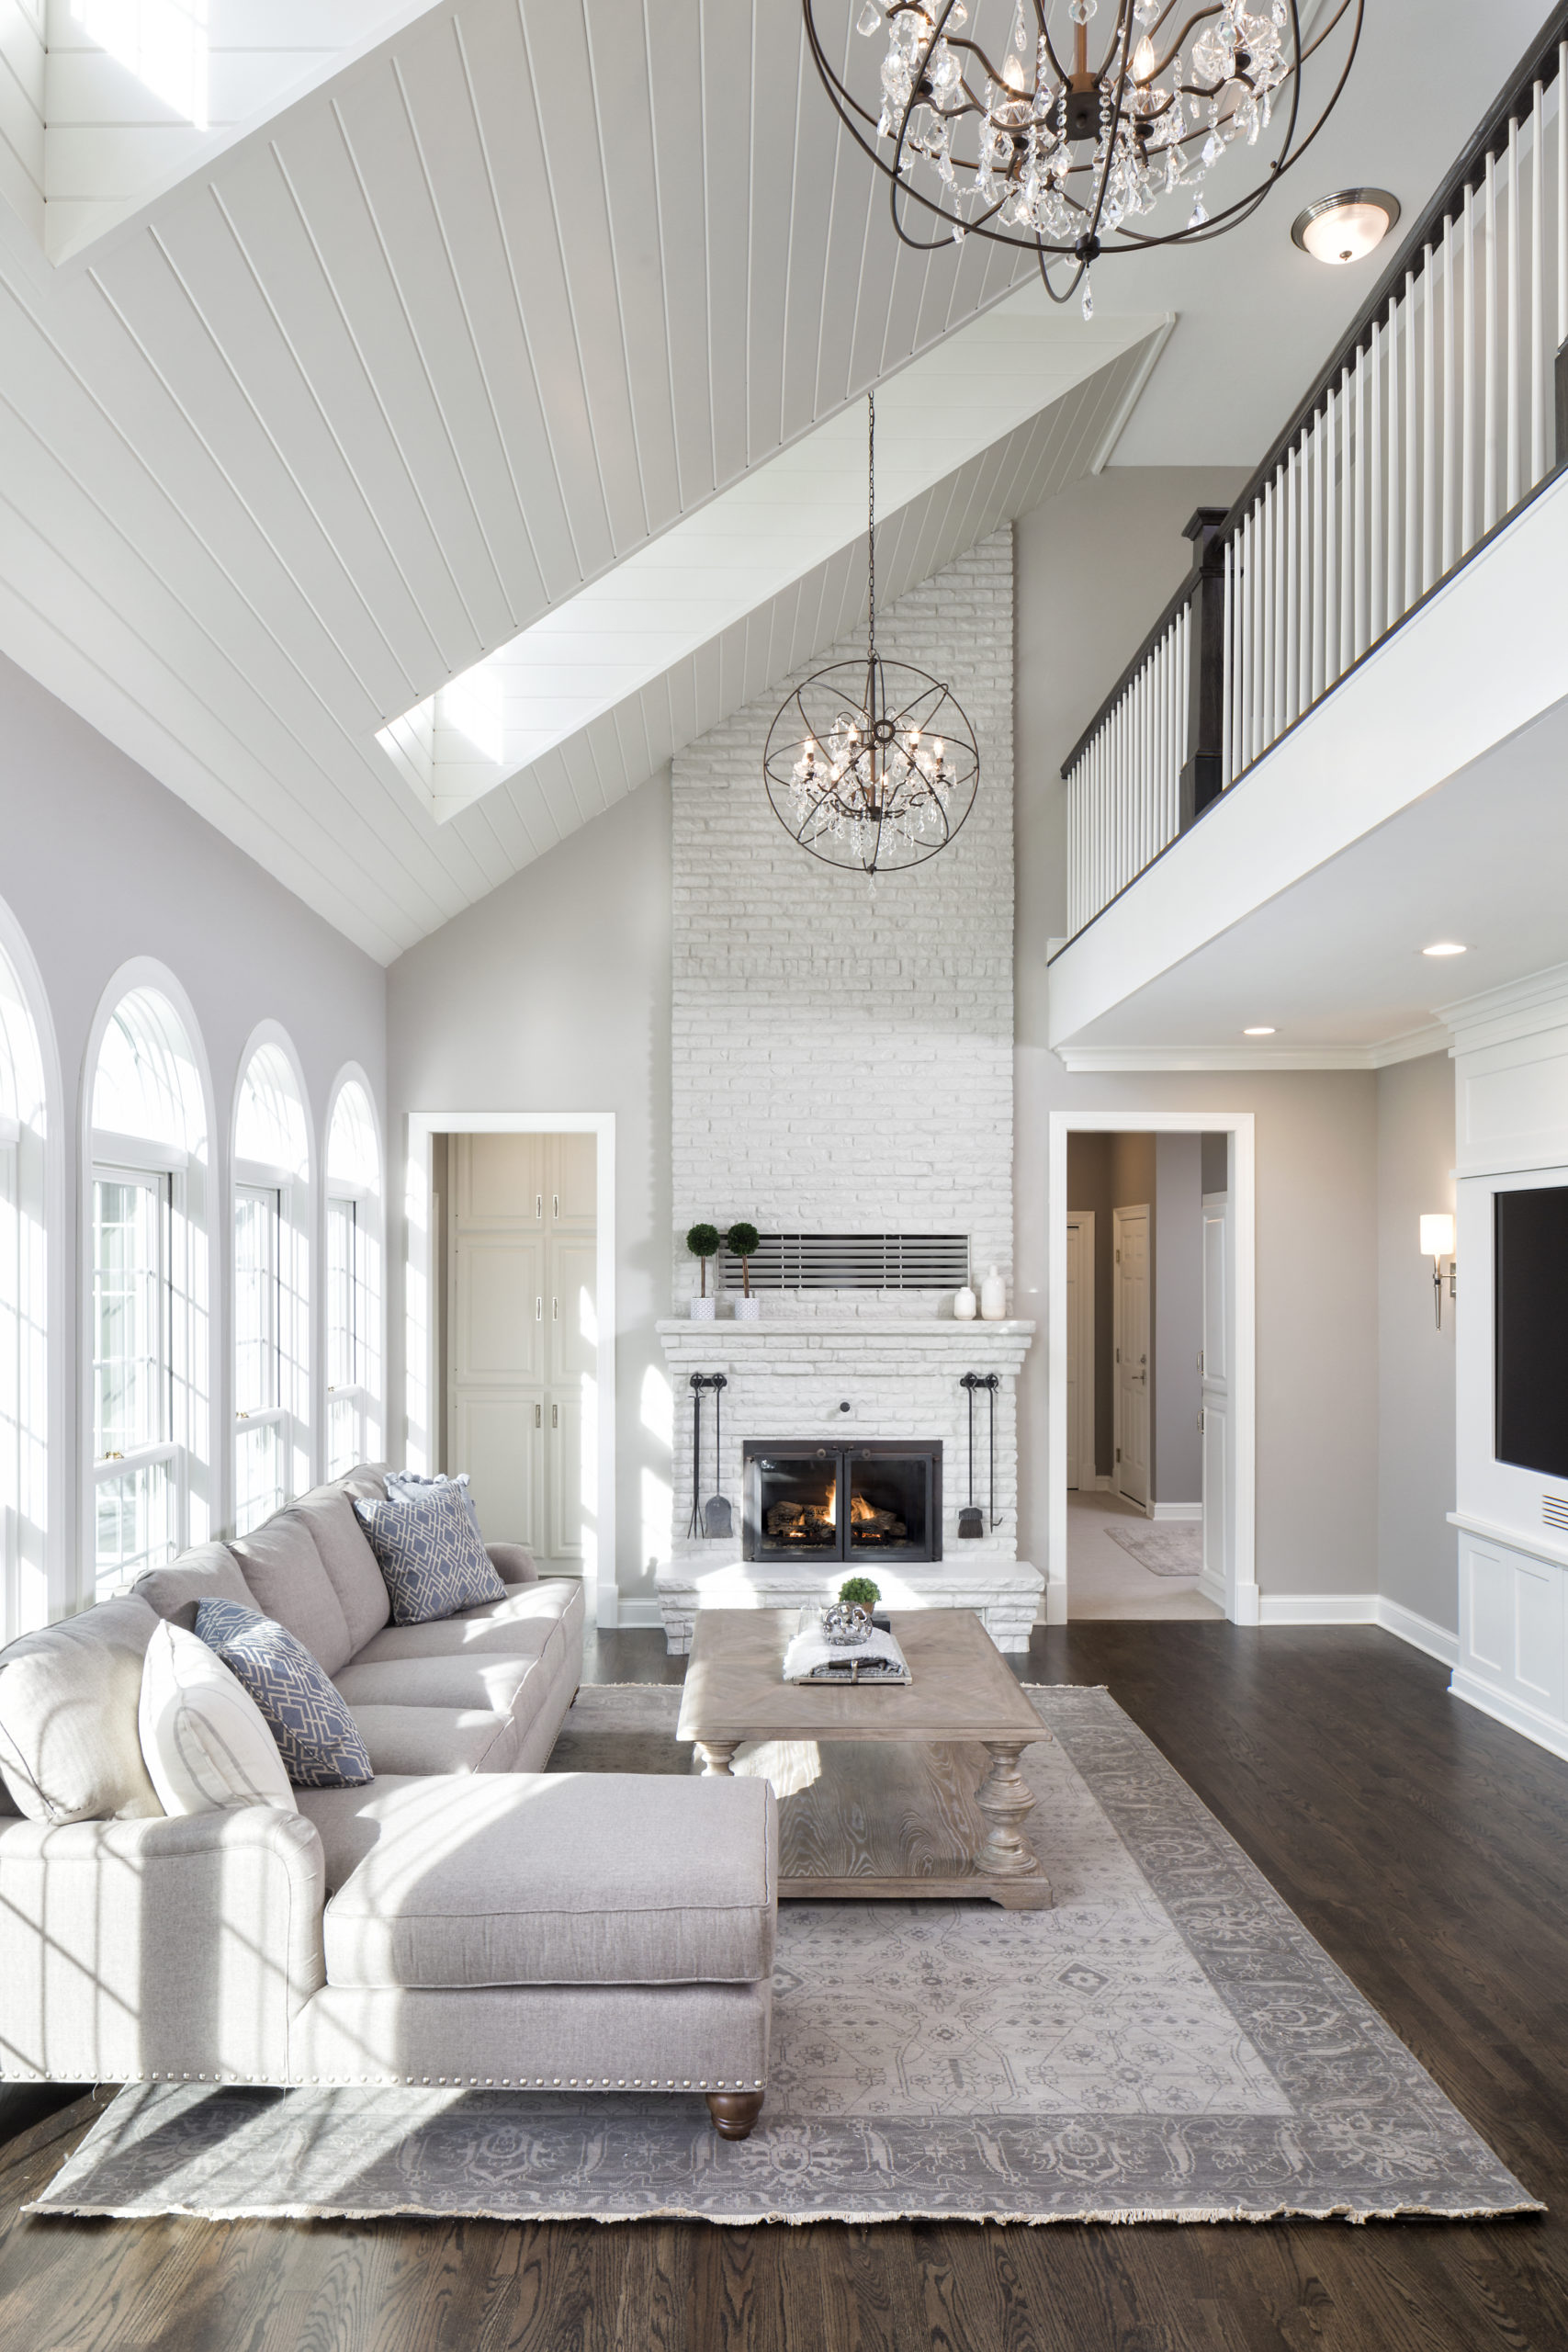 A large living room with hardwood floors and a vaulted ceiling.